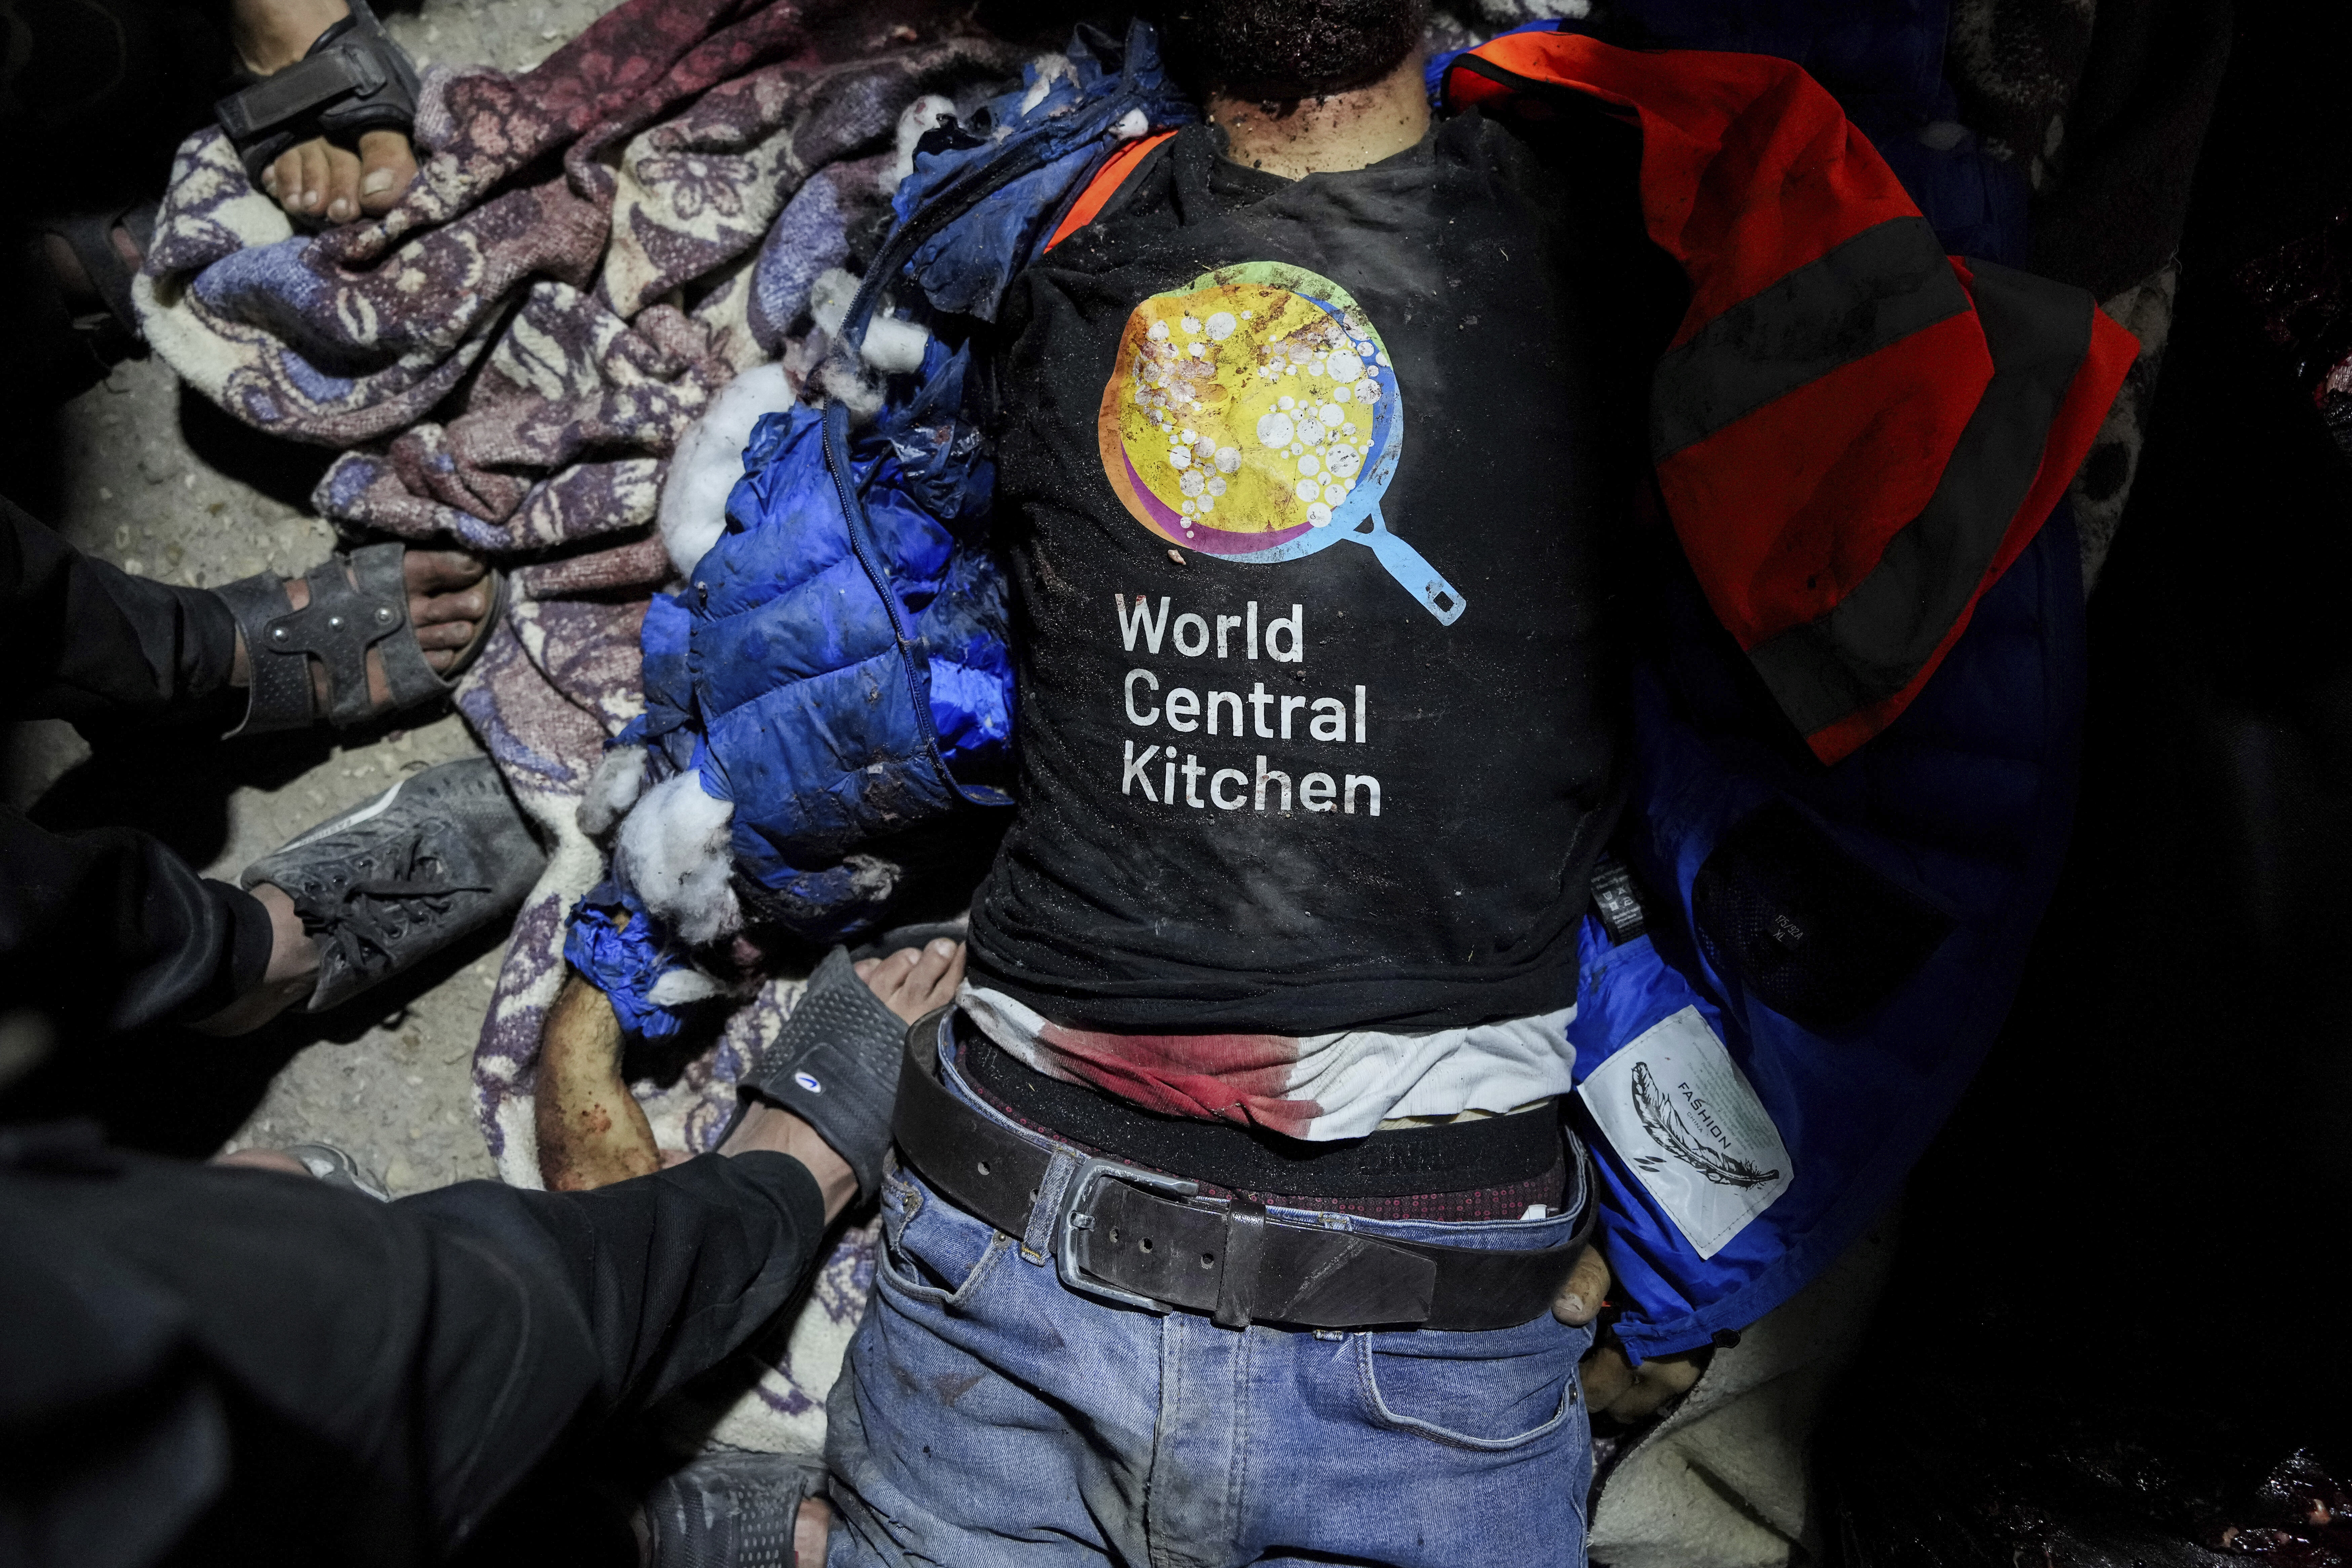 Person lying on ground with &quot;World Central Kitchen&quot; shirt, surrounded by helping hands, debris visible